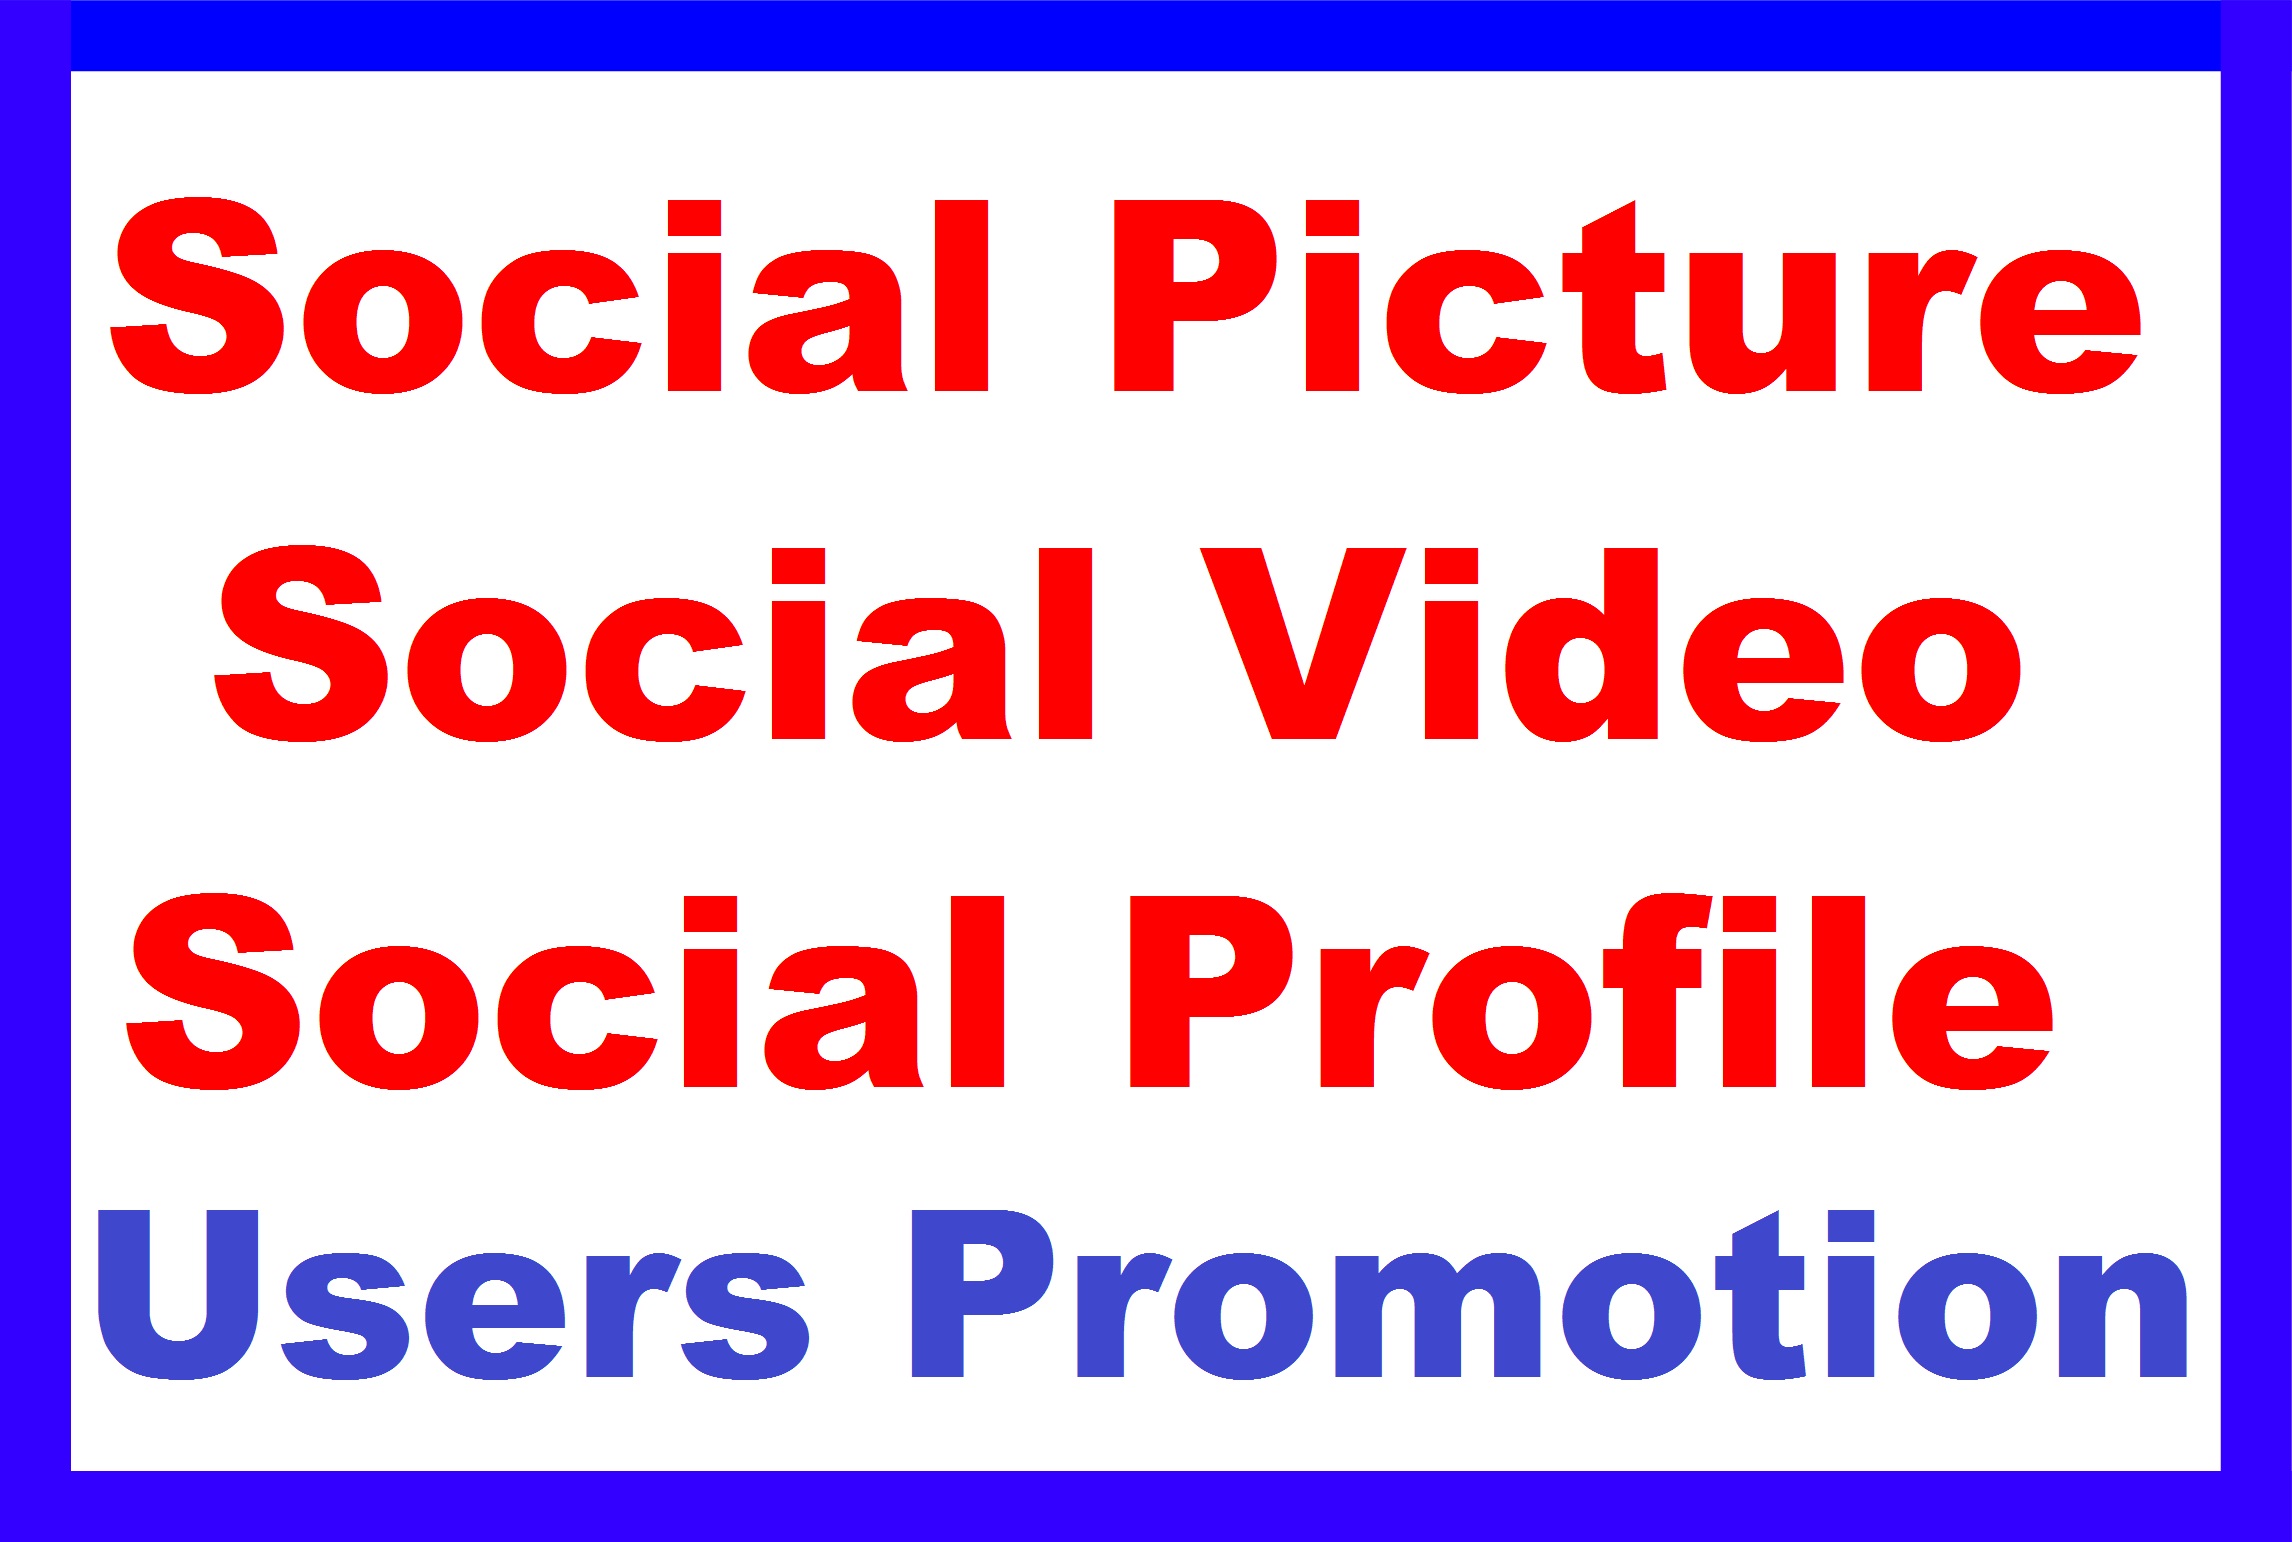 Promote Your PHOTO AND VIDEO AND PROFILE SUPER FAST